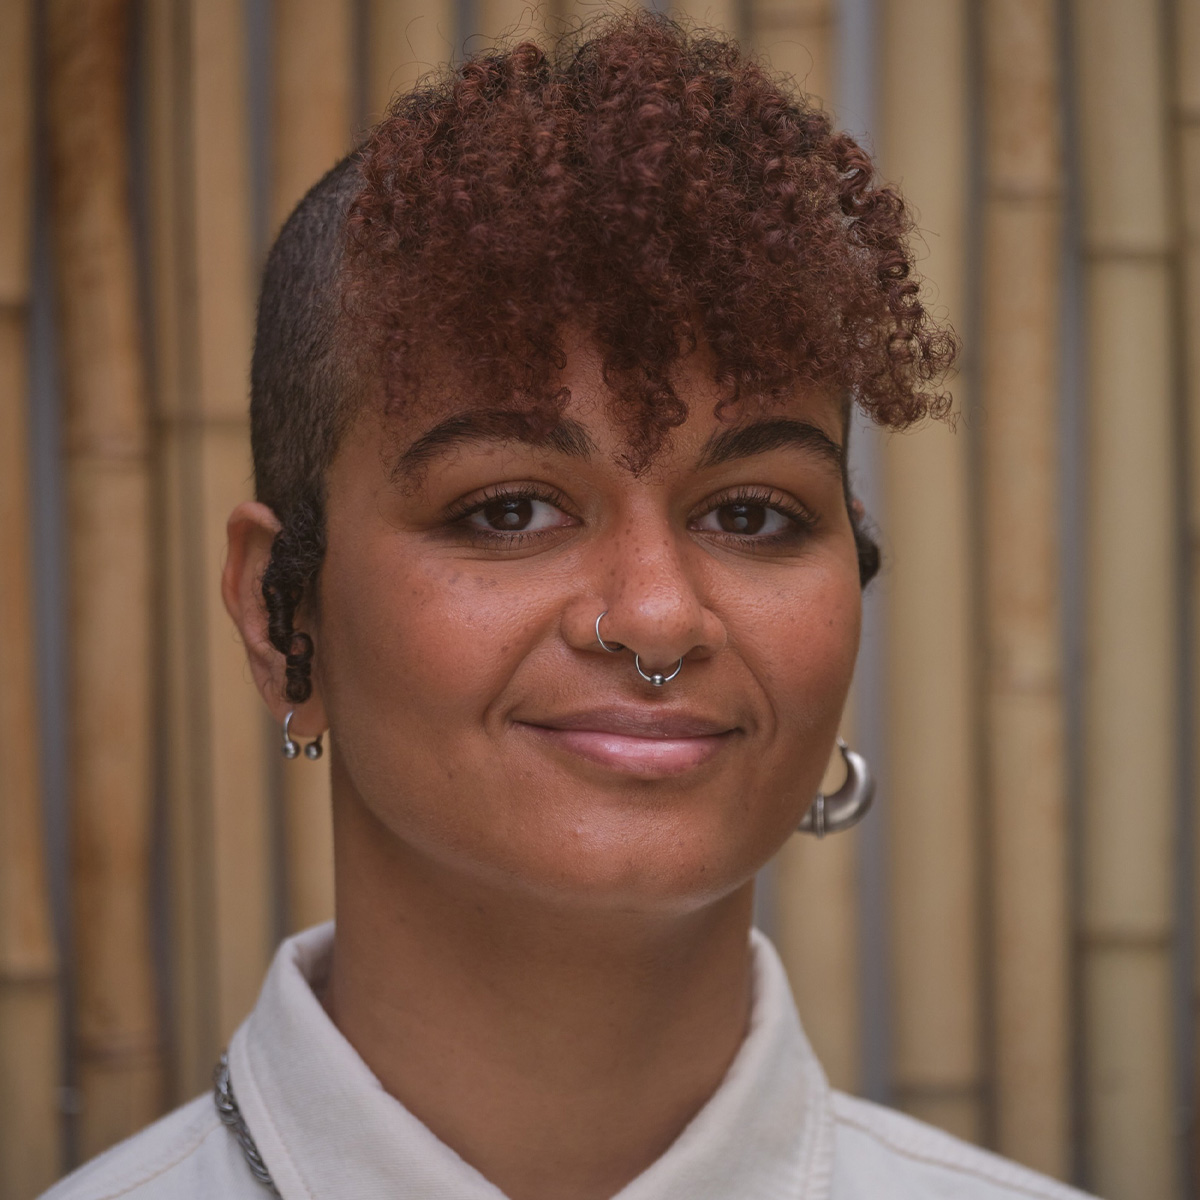 Camille Sapara Barton color portrait. Camille is a brown skinned non-binary person with their head shaved along the sides and curly brown hair create bangs over their forehead. They are smiling, wears silver earrings, and posed in front of a wall of bamboo.